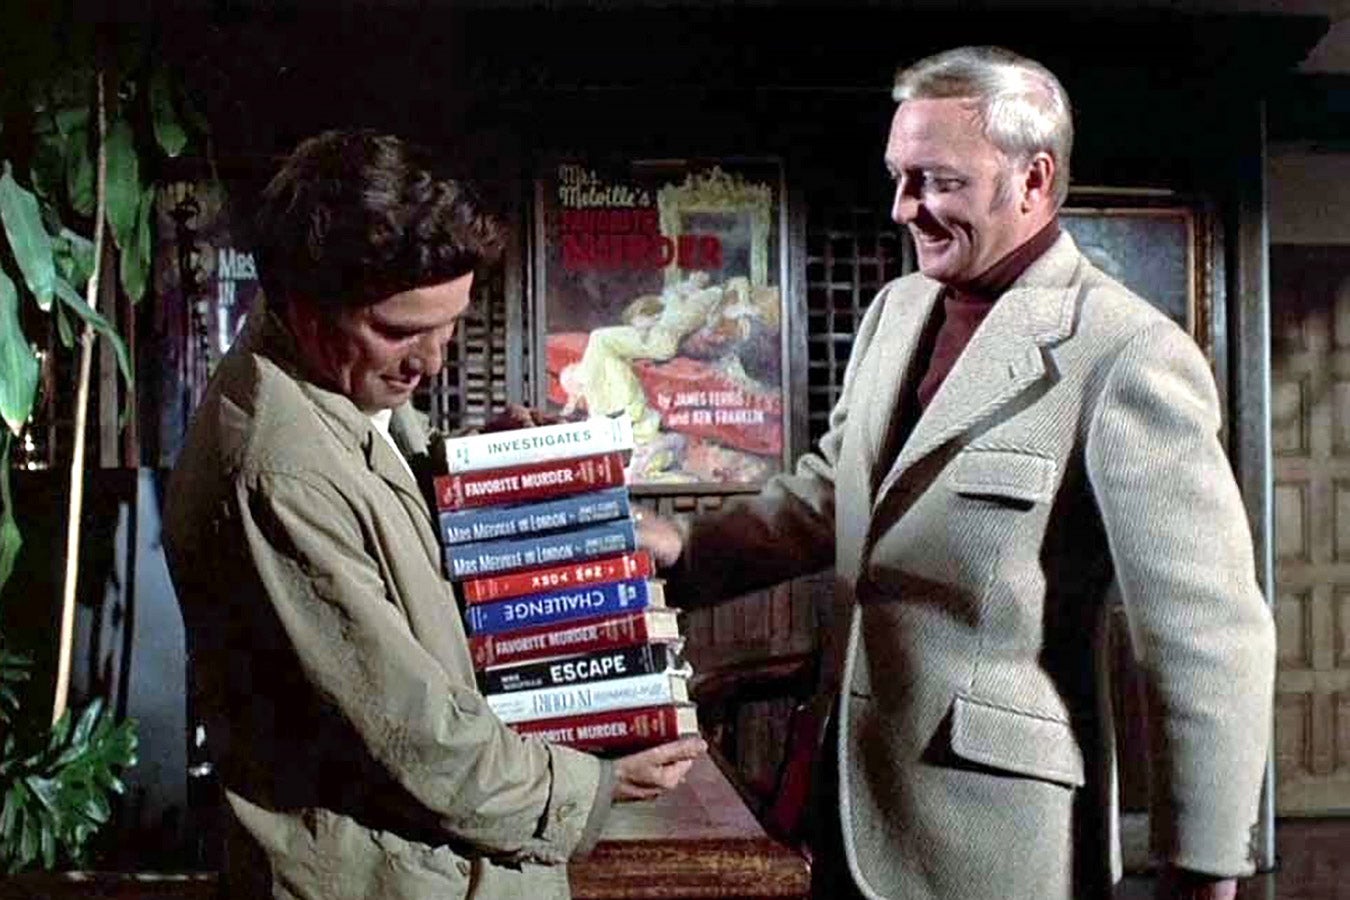 Columbo holds a stack of books, while a man in a suit selects one of the books.